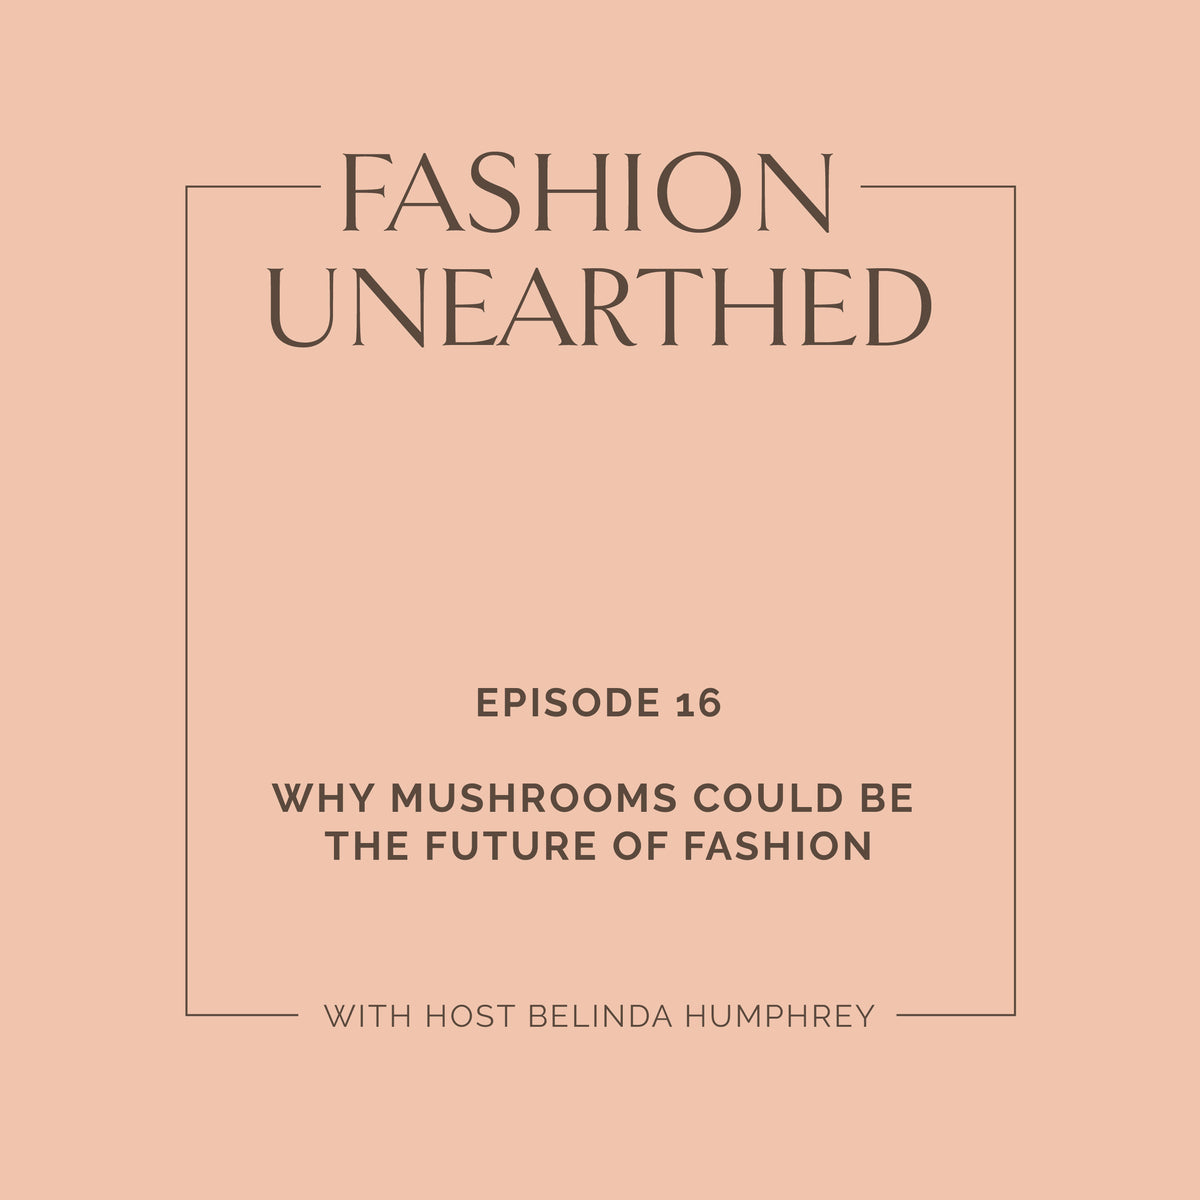 Episode 16: Why mushrooms could be the future of fashion